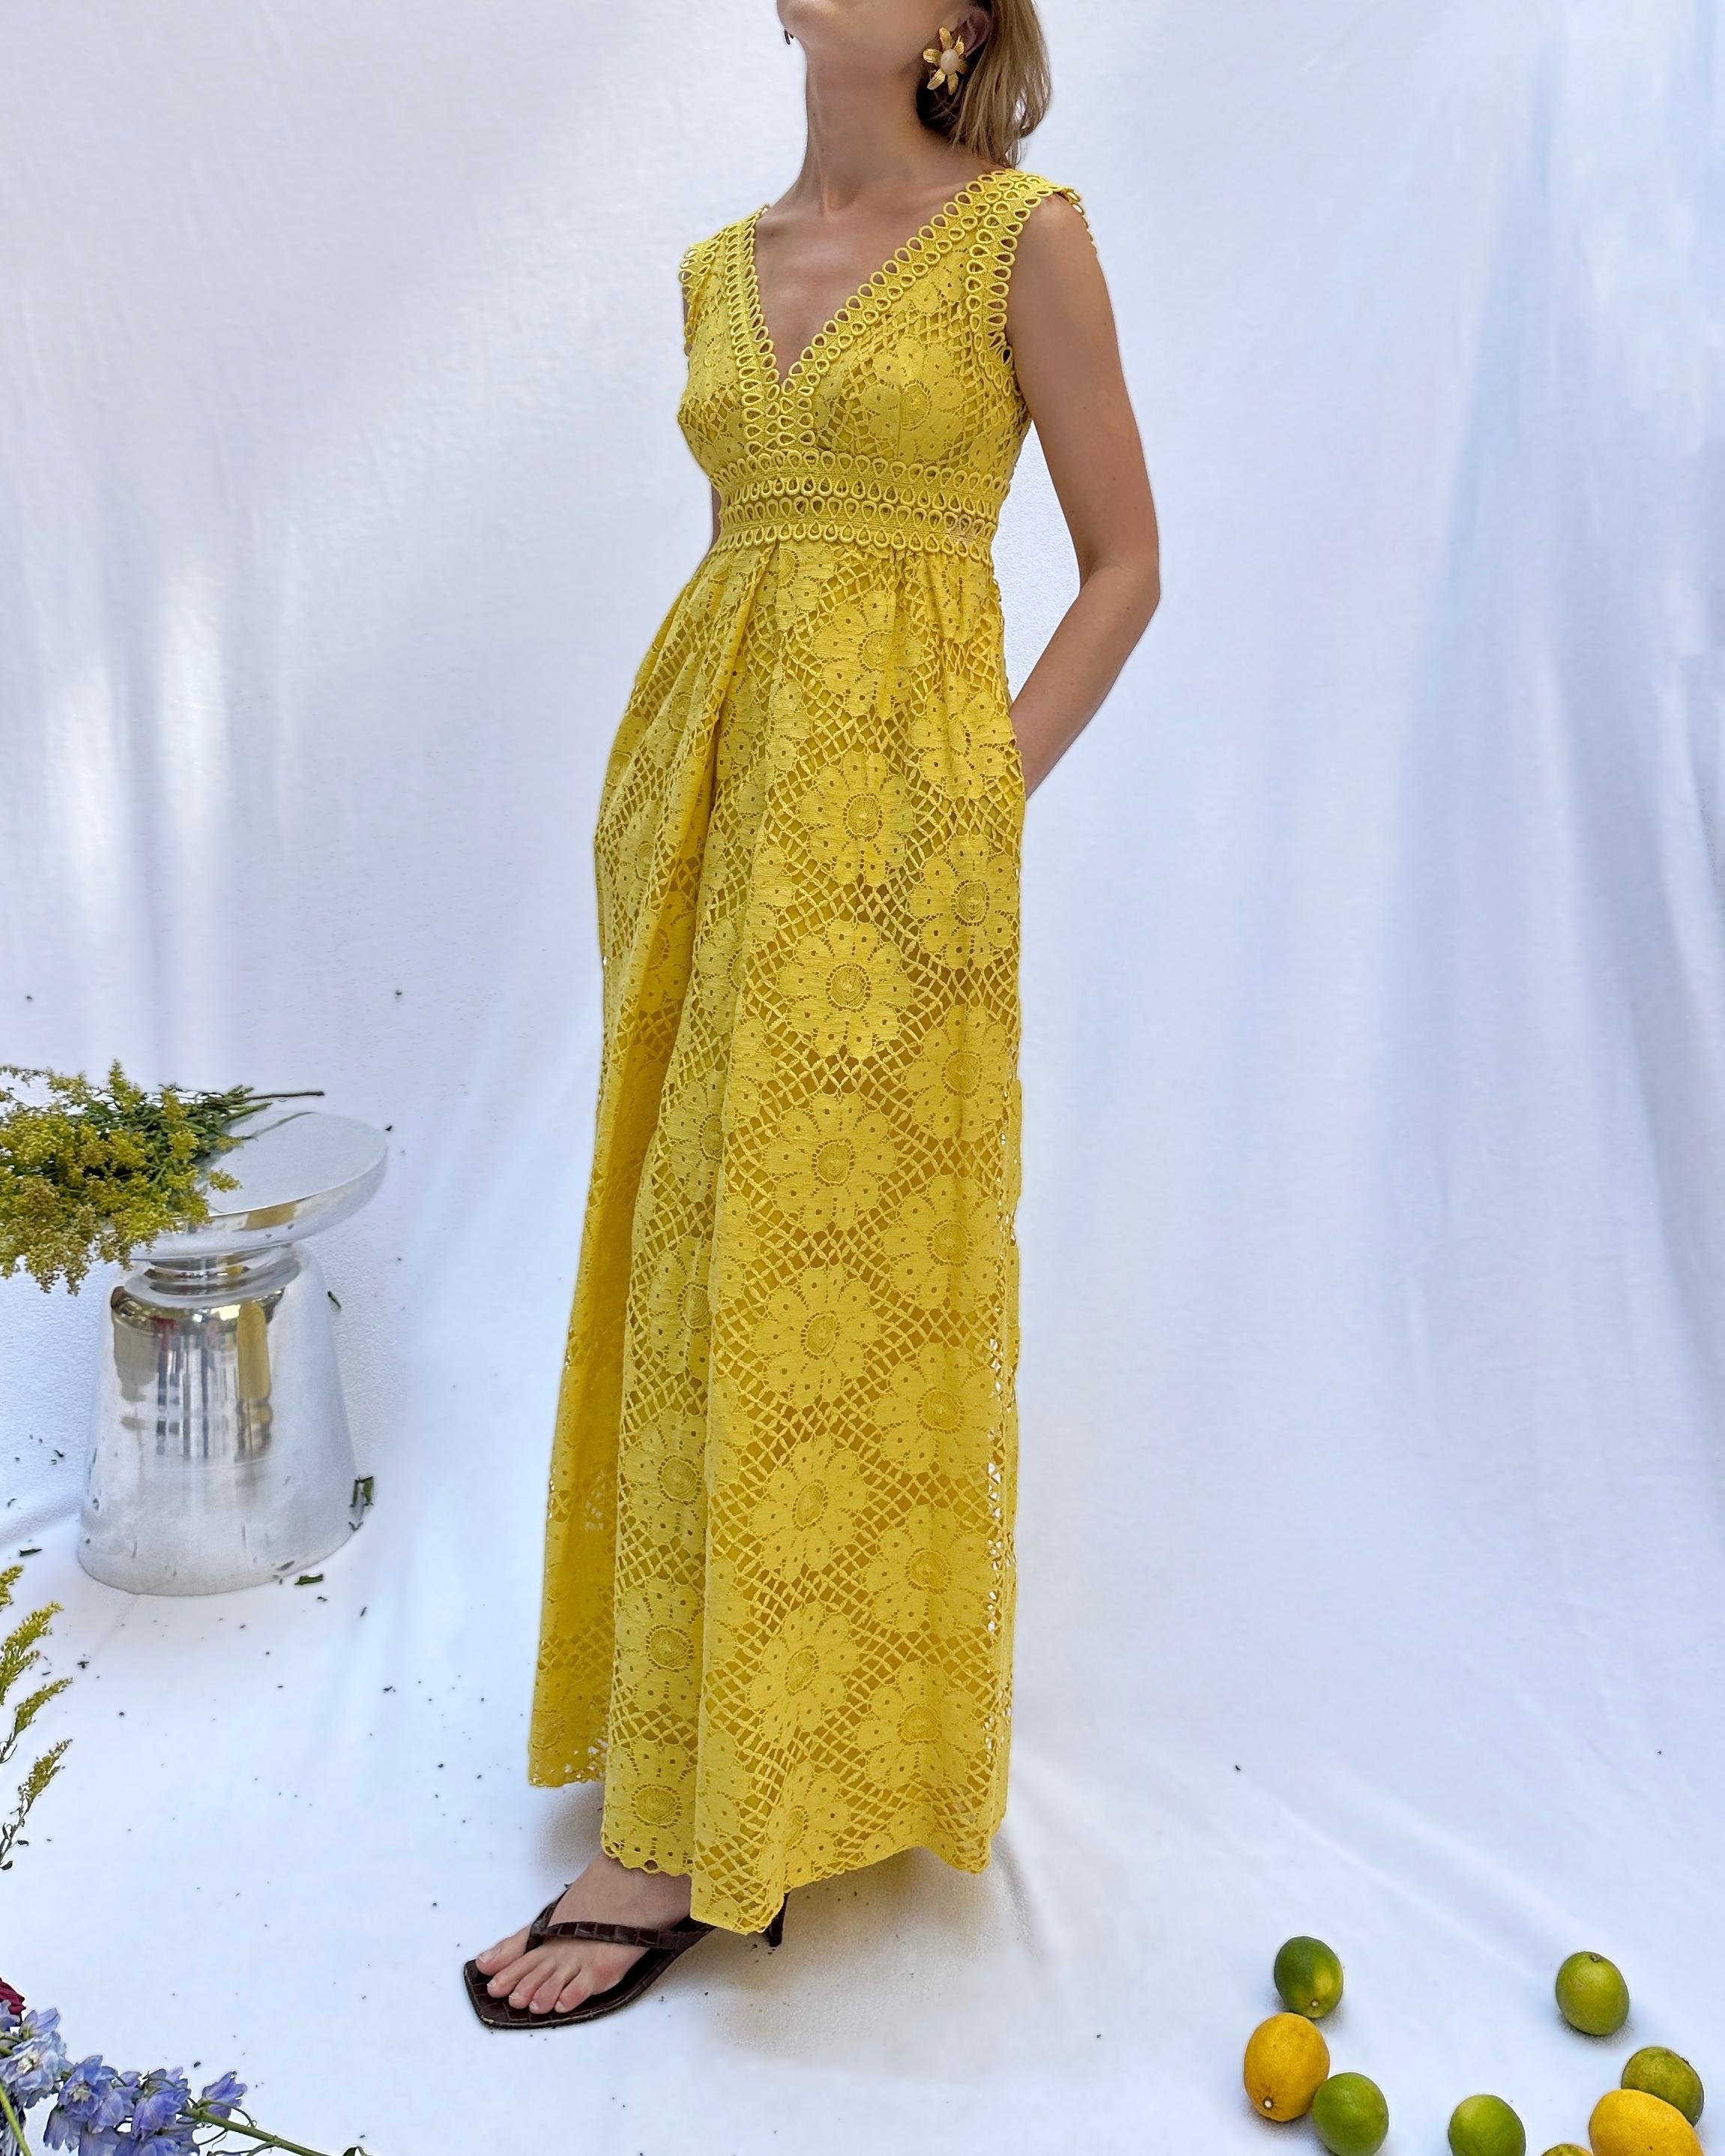 This vintage Lillie Rubin yellow guipure lace column dress was made in the 1970s, of the most gorgeous, vibrant shade of canary yellow. I love all the intricate details of the floral-motif crochet lace, which leaves a scalloped edges at the